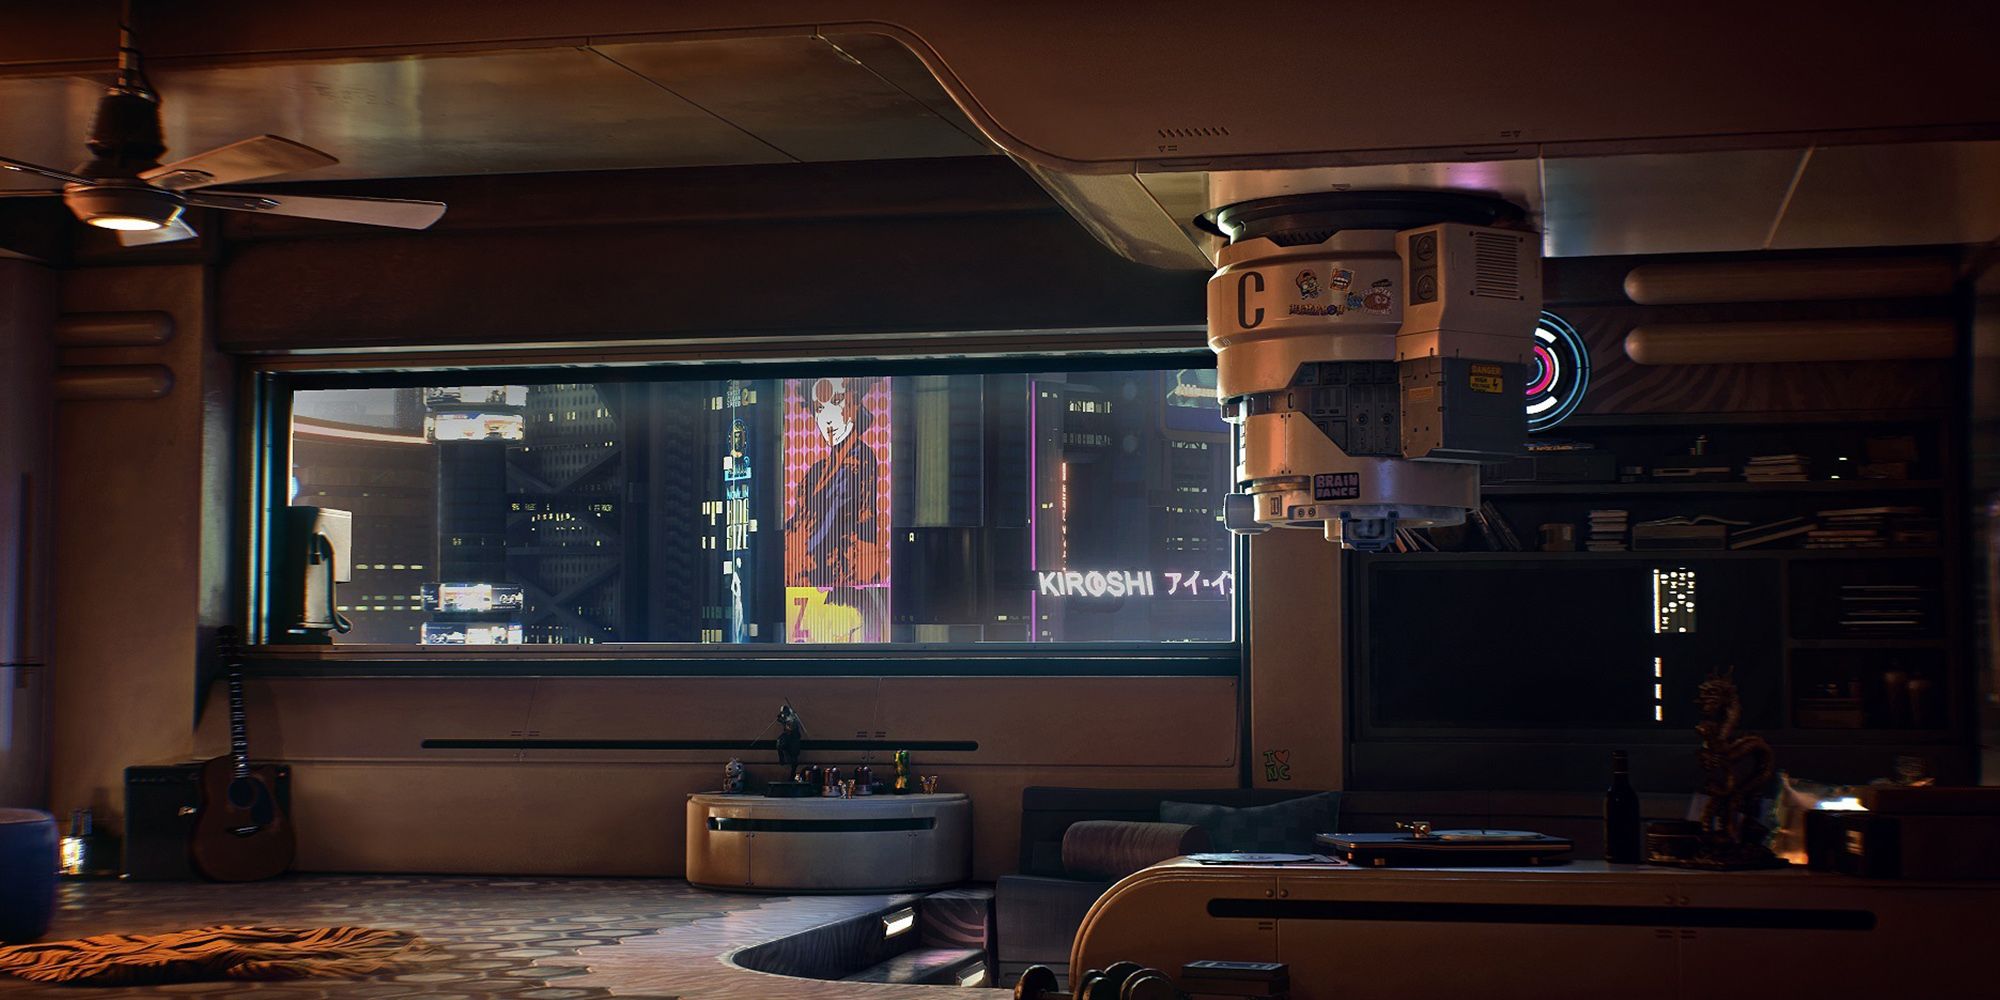 Featured image of V's apartment lounge in Cyberpunk 2077.